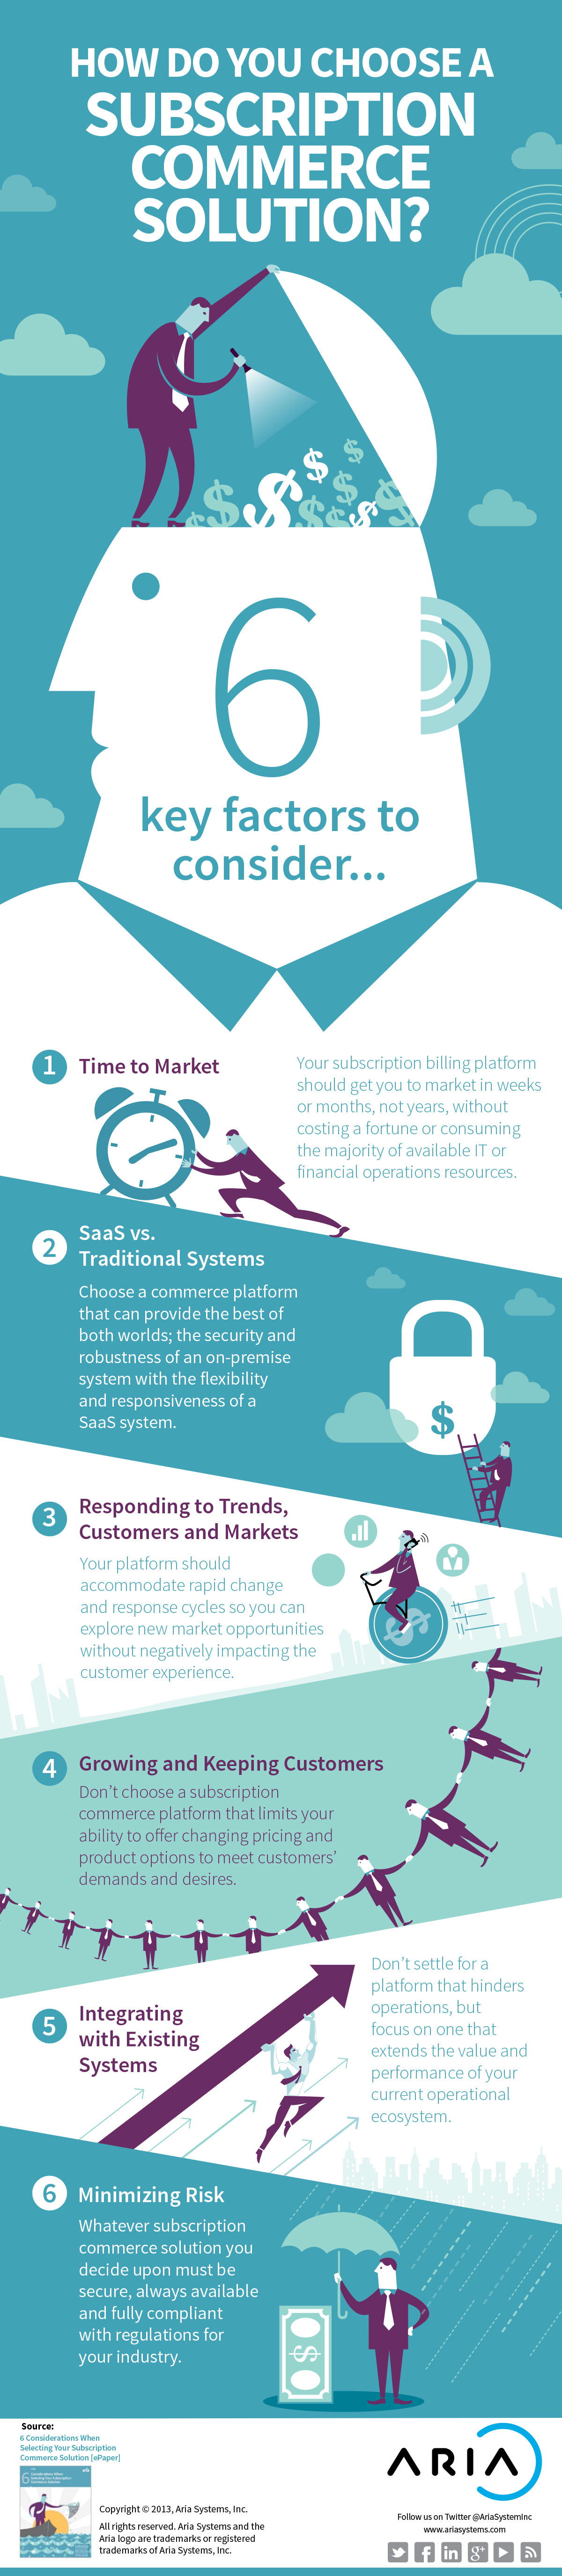 INFOGRAPHIC – HOW DO YOU CHOOSE A SUBSCRIPTION COMMERCE SOLUTION?